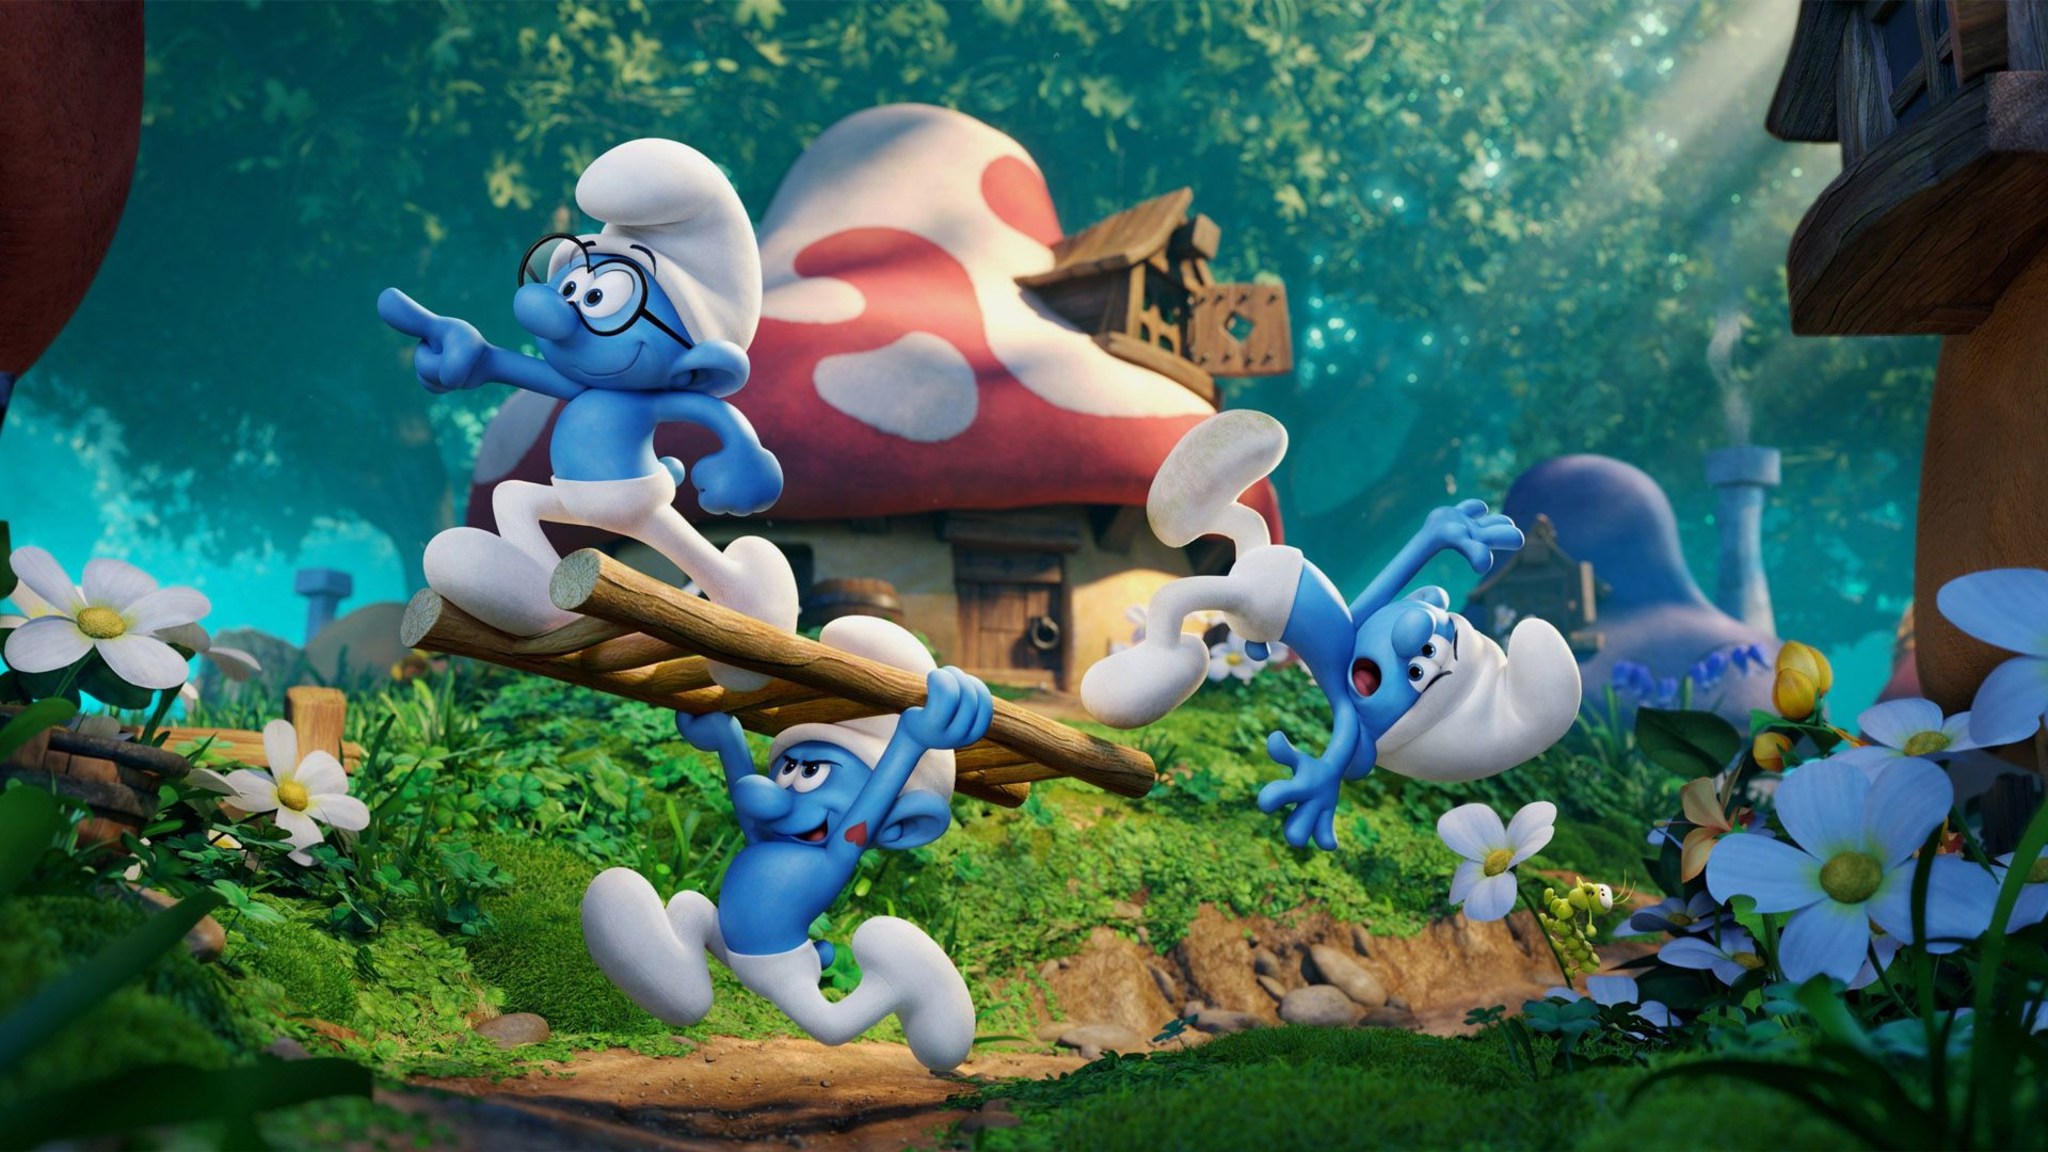 Kidscreen » Archive » FAO Schwarz goes blue with new Smurfs promotion